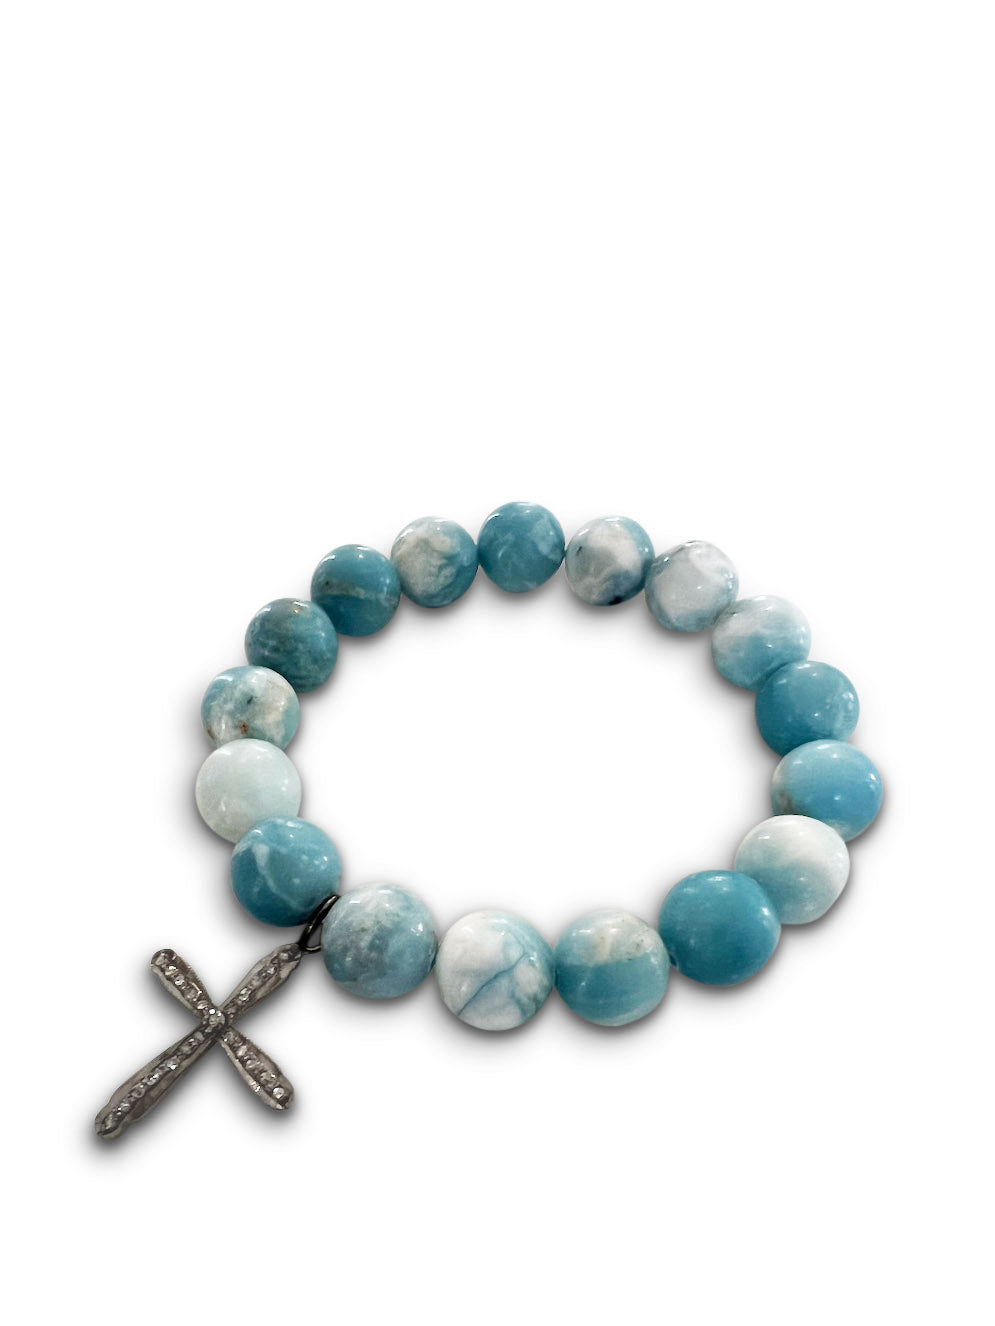 Larimar 10mm beads with Pave Diamond Sterling Silver Cross